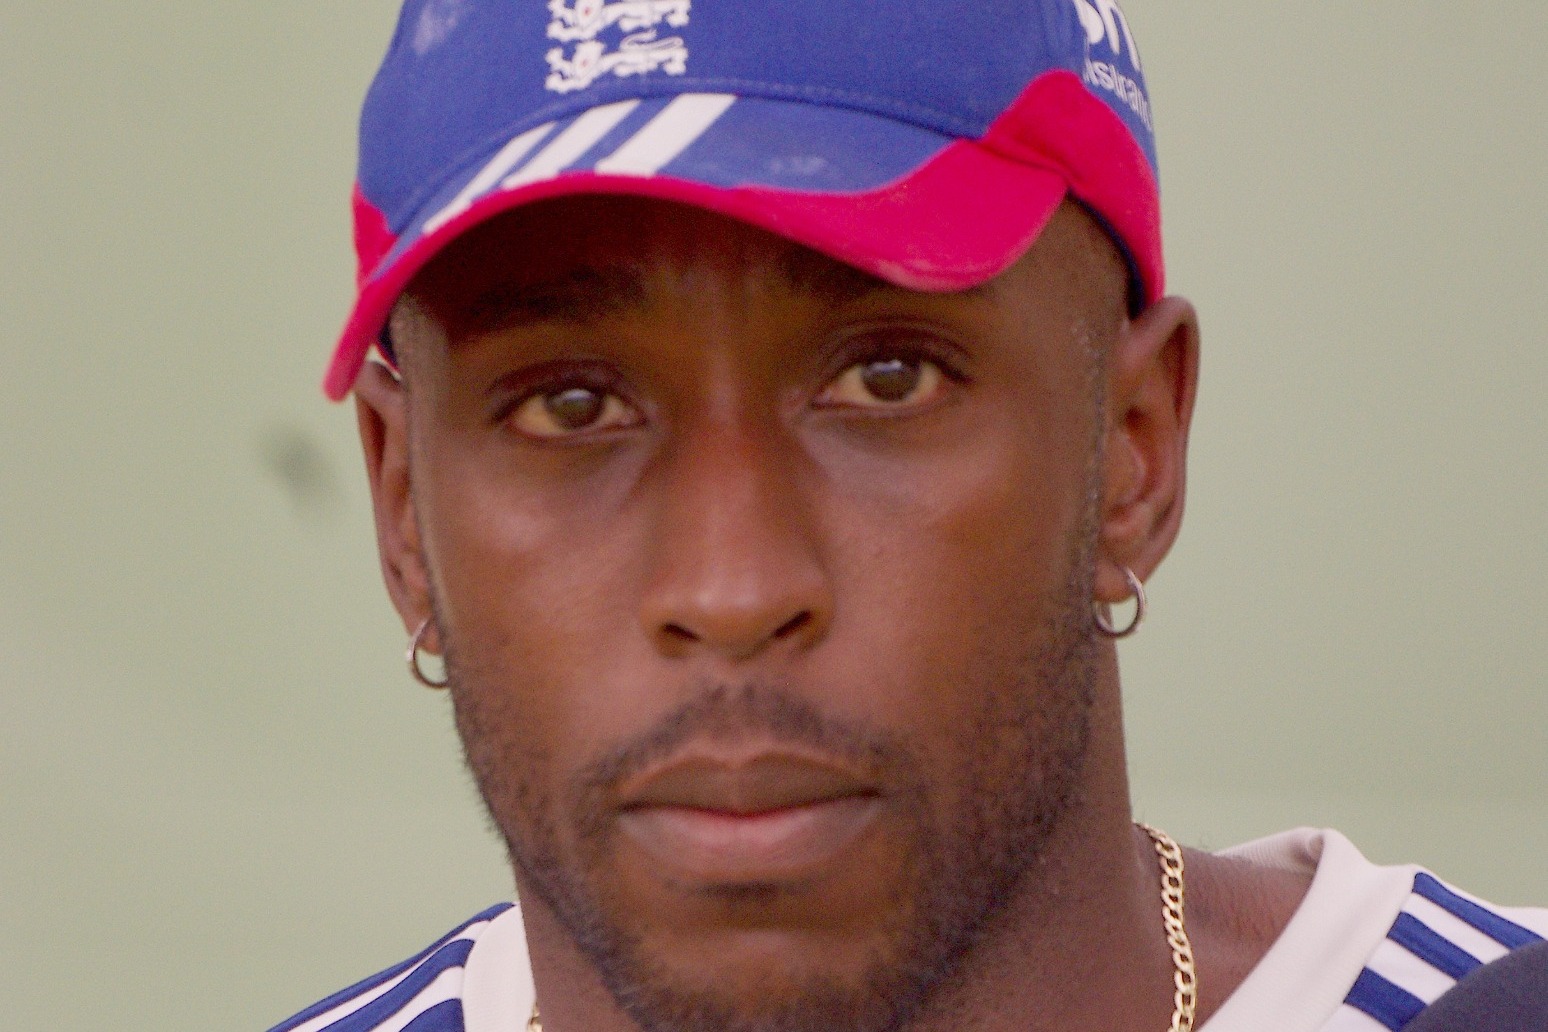 Michael Carberry to lead cricket-focused Kick It Out project 